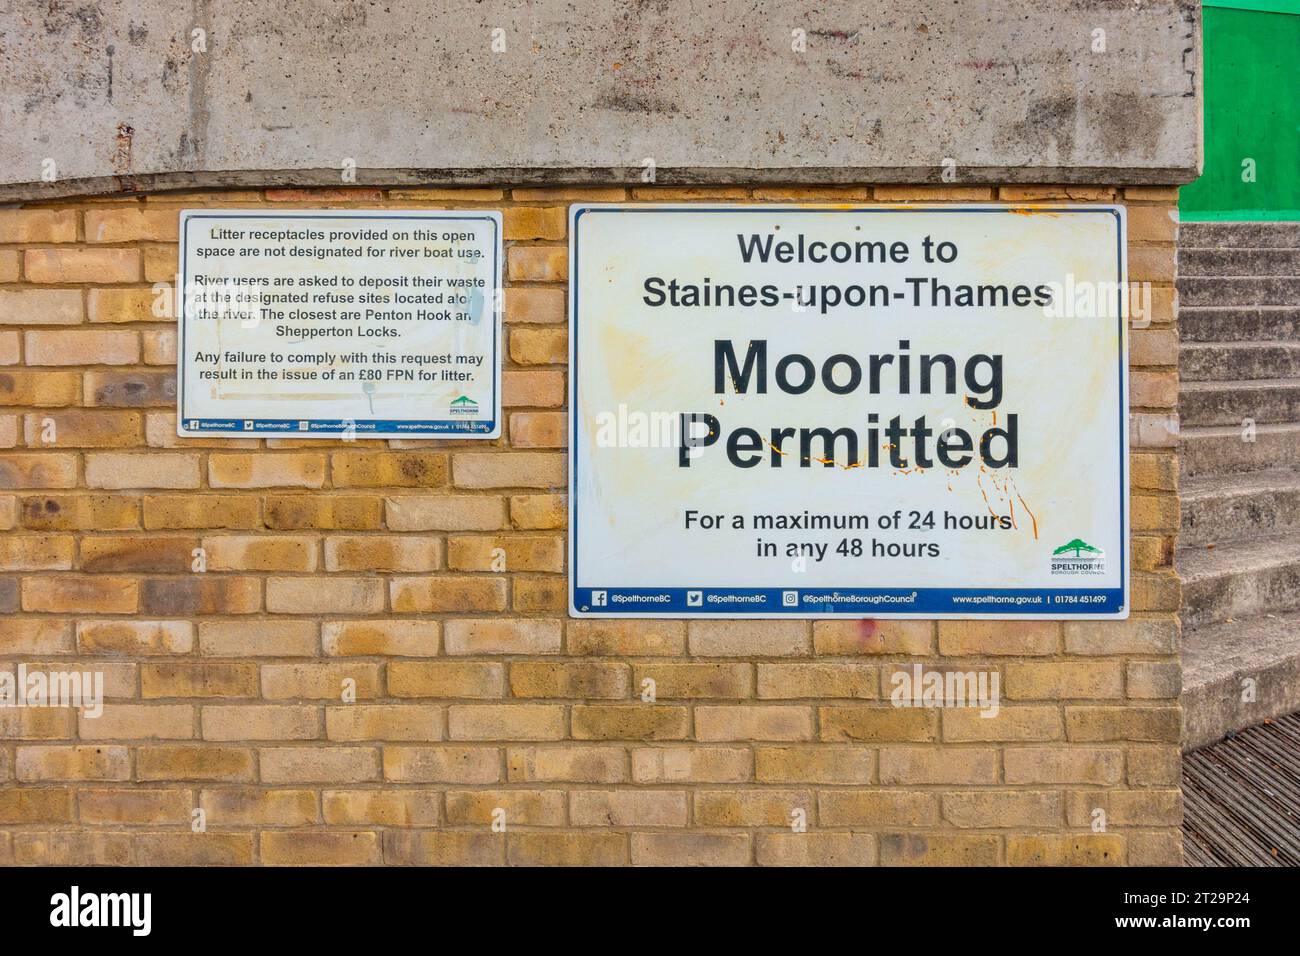 Signs attached to a brick wall next to the River Thames at Staines-upon-Thames informing people that Mooring is permitted Stock Photo